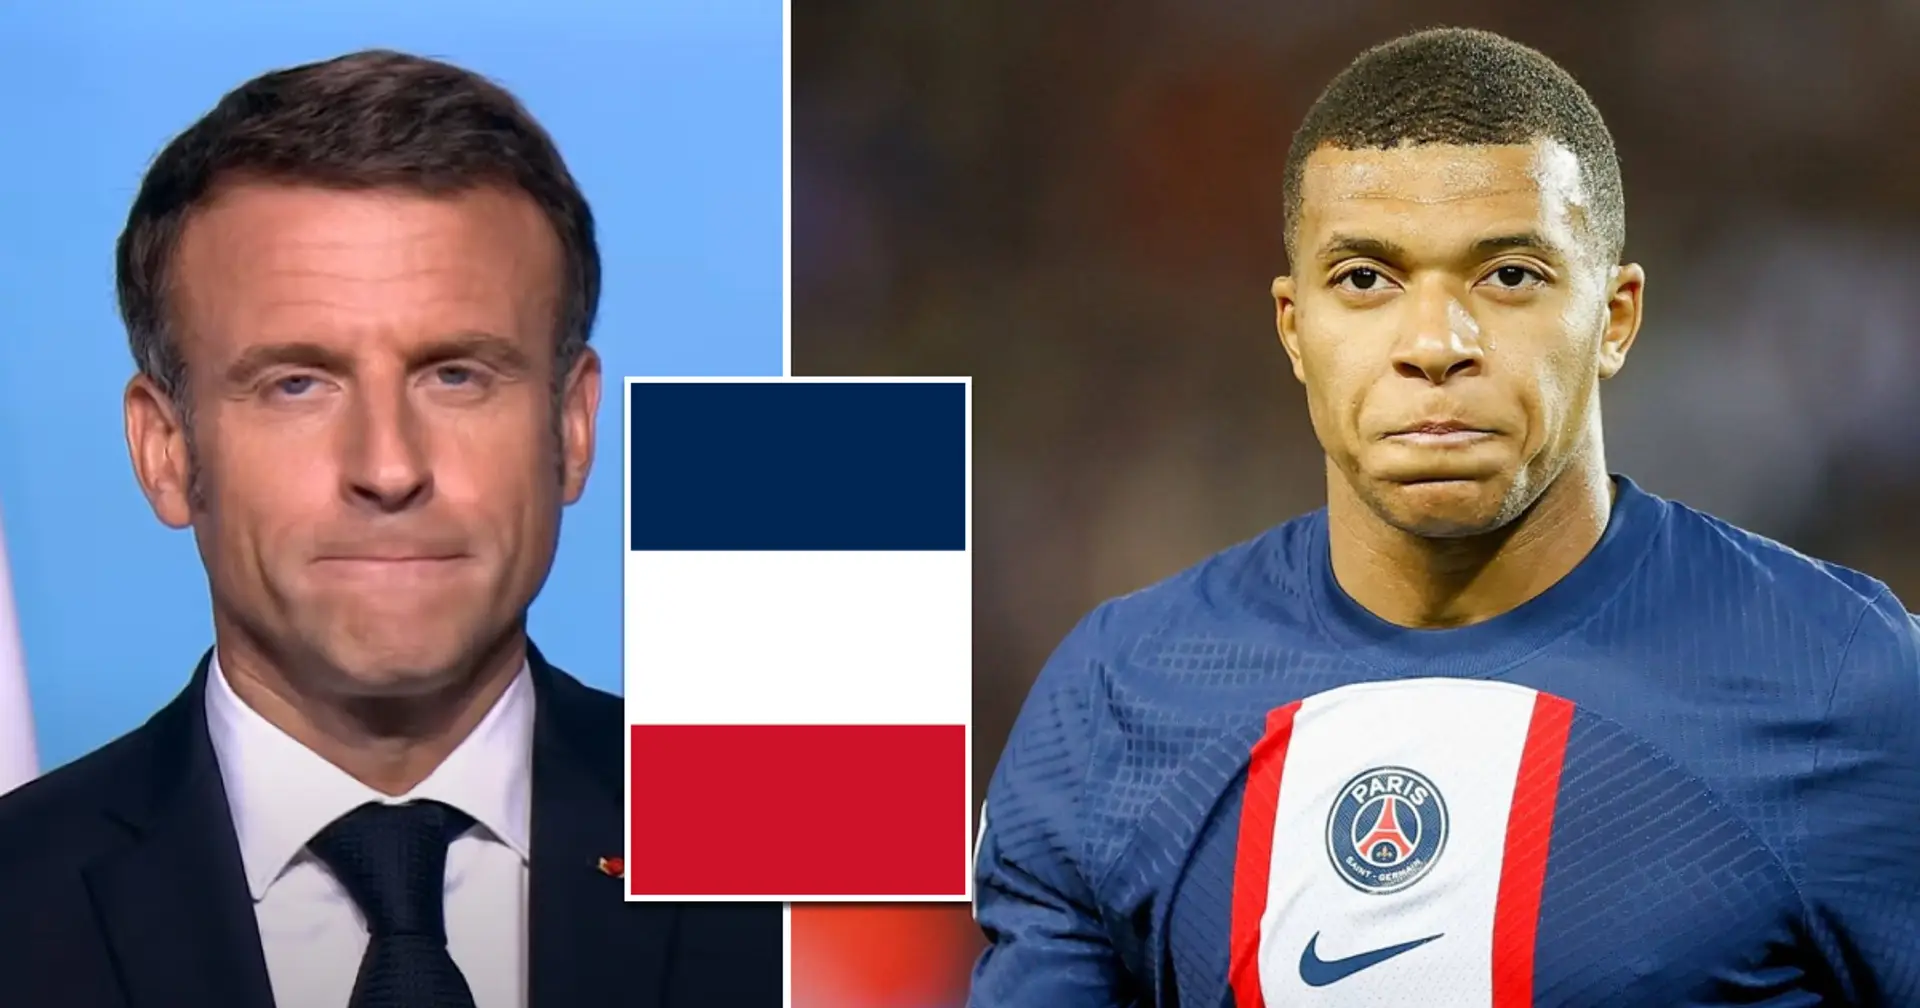 'Macron will call the Avengers before he lets Mbappe play in a Muslim country'